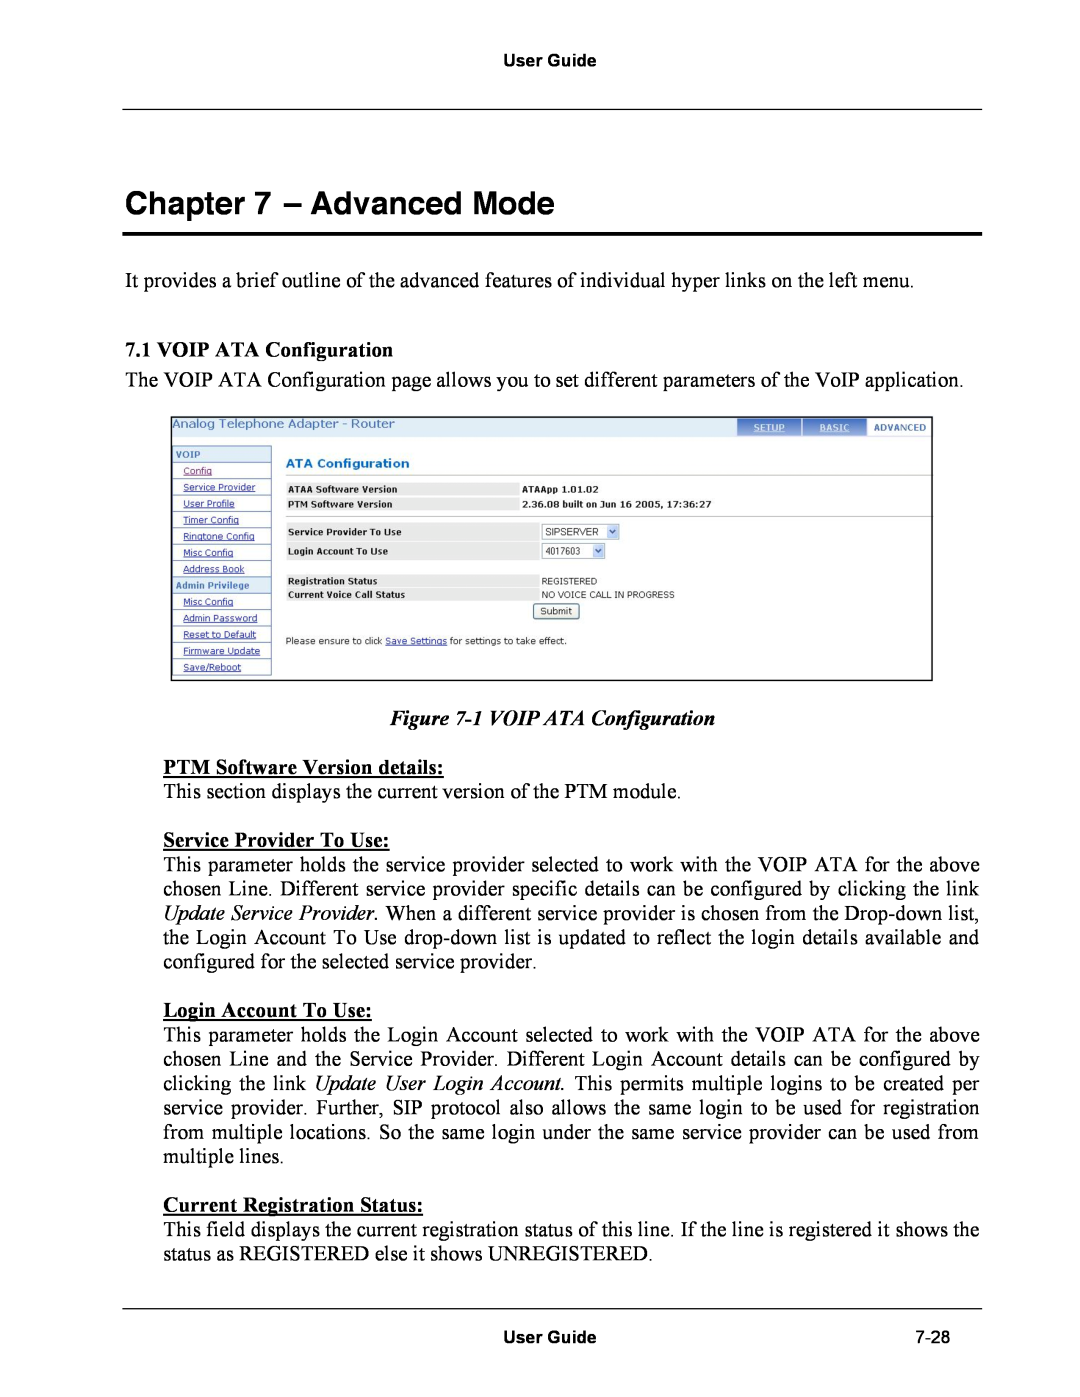 Netopia Network Adapater Advanced Mode, 1 VOIP ATA Configuration, PTM Software Version details, Login Account To Use 